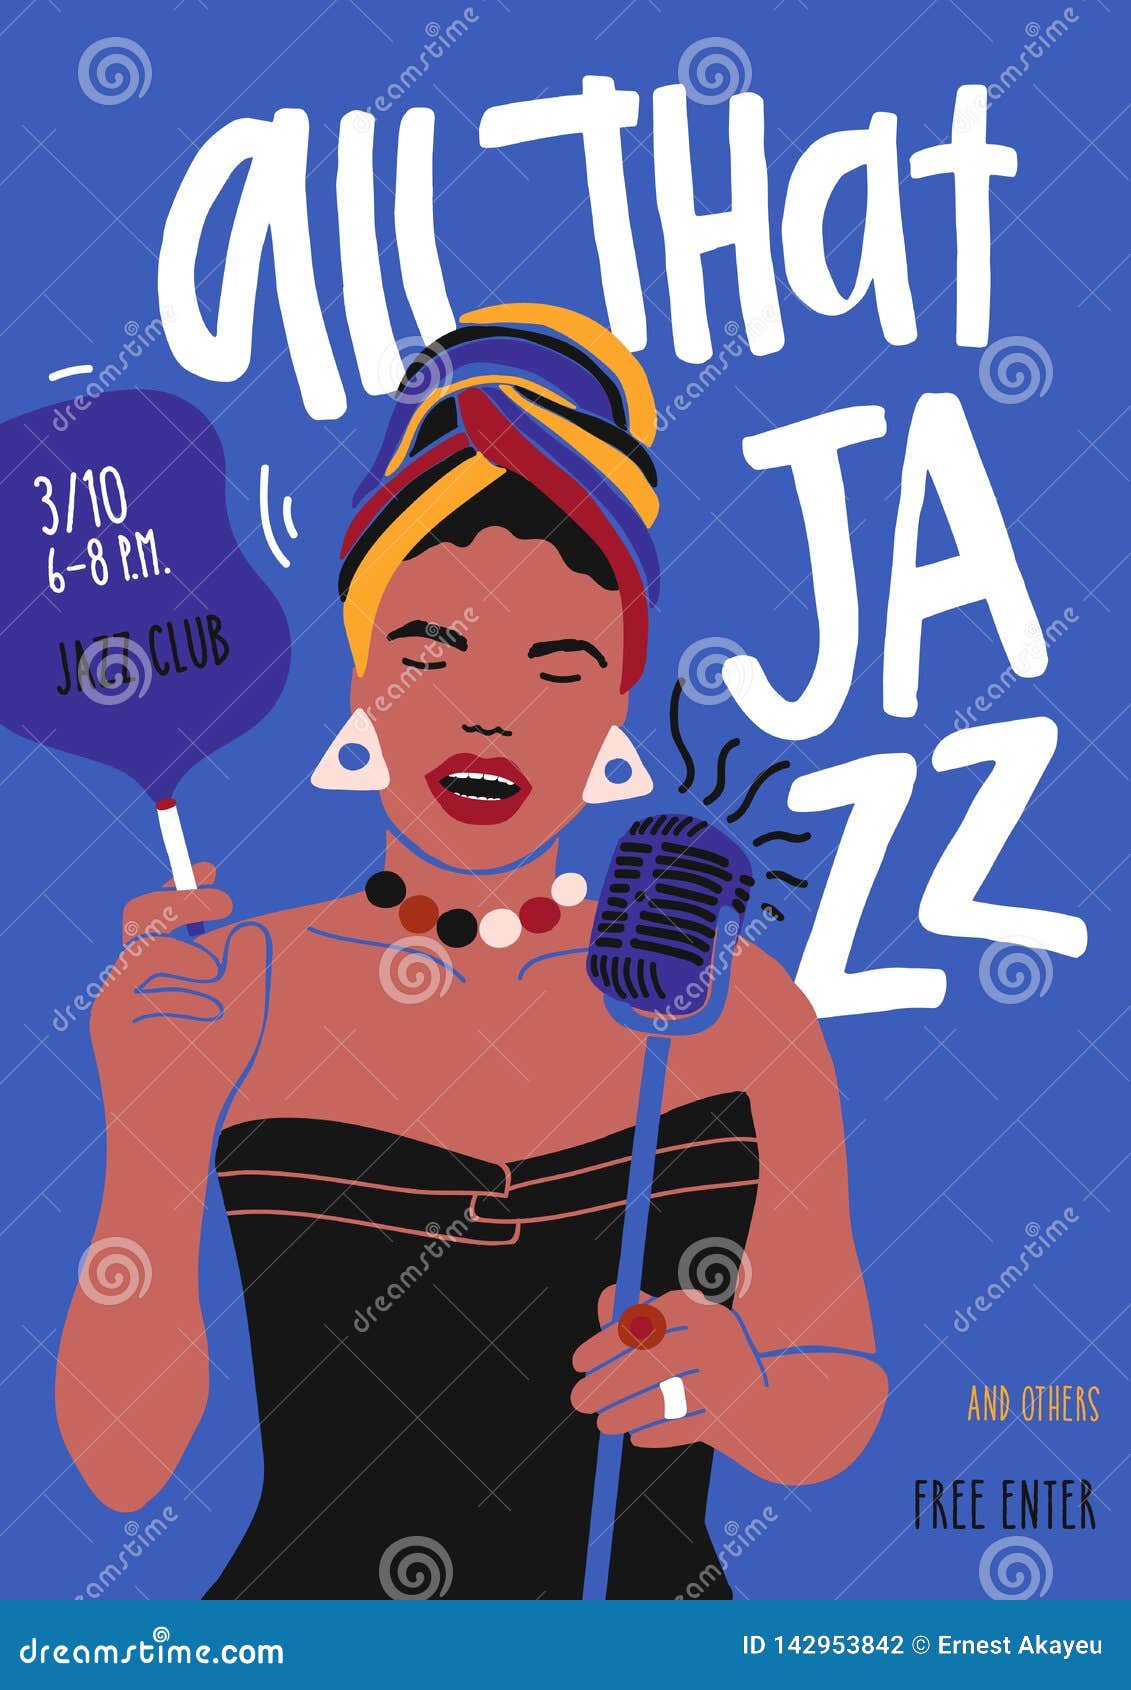 poster or flyer template for jazz music performance with african american female singer, woman vocalist or soloist with